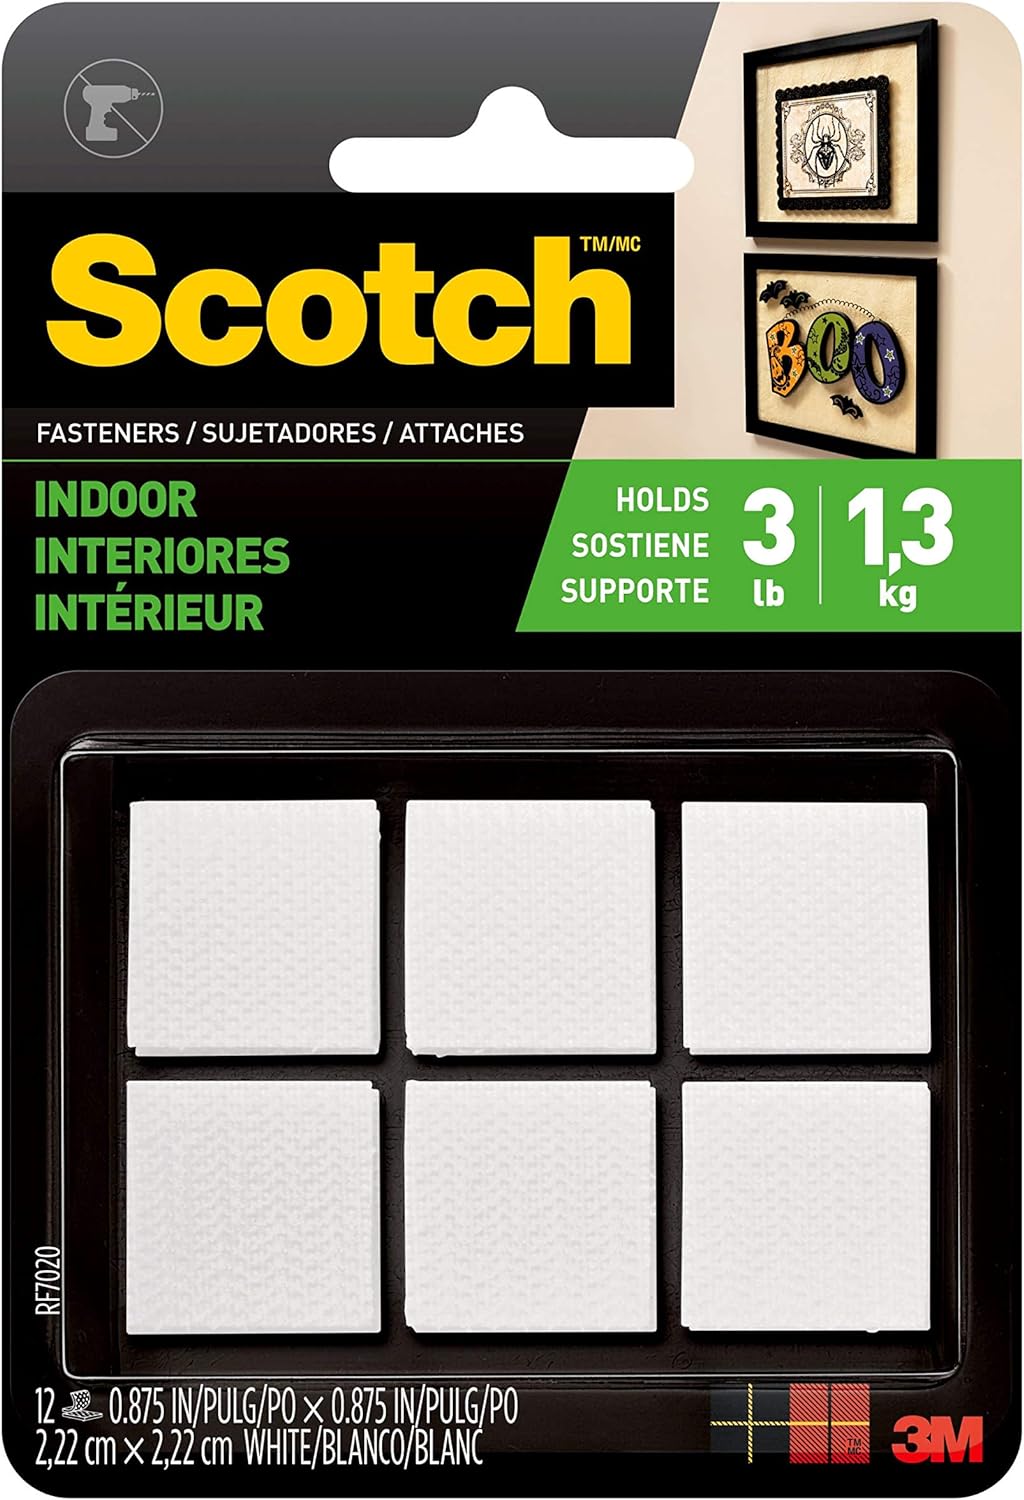 3M Scotch Multi-Purpose Hook and Loop Fasteners, For Indoor Use, White, 7/8 in, 12-Pair, 24-Squares